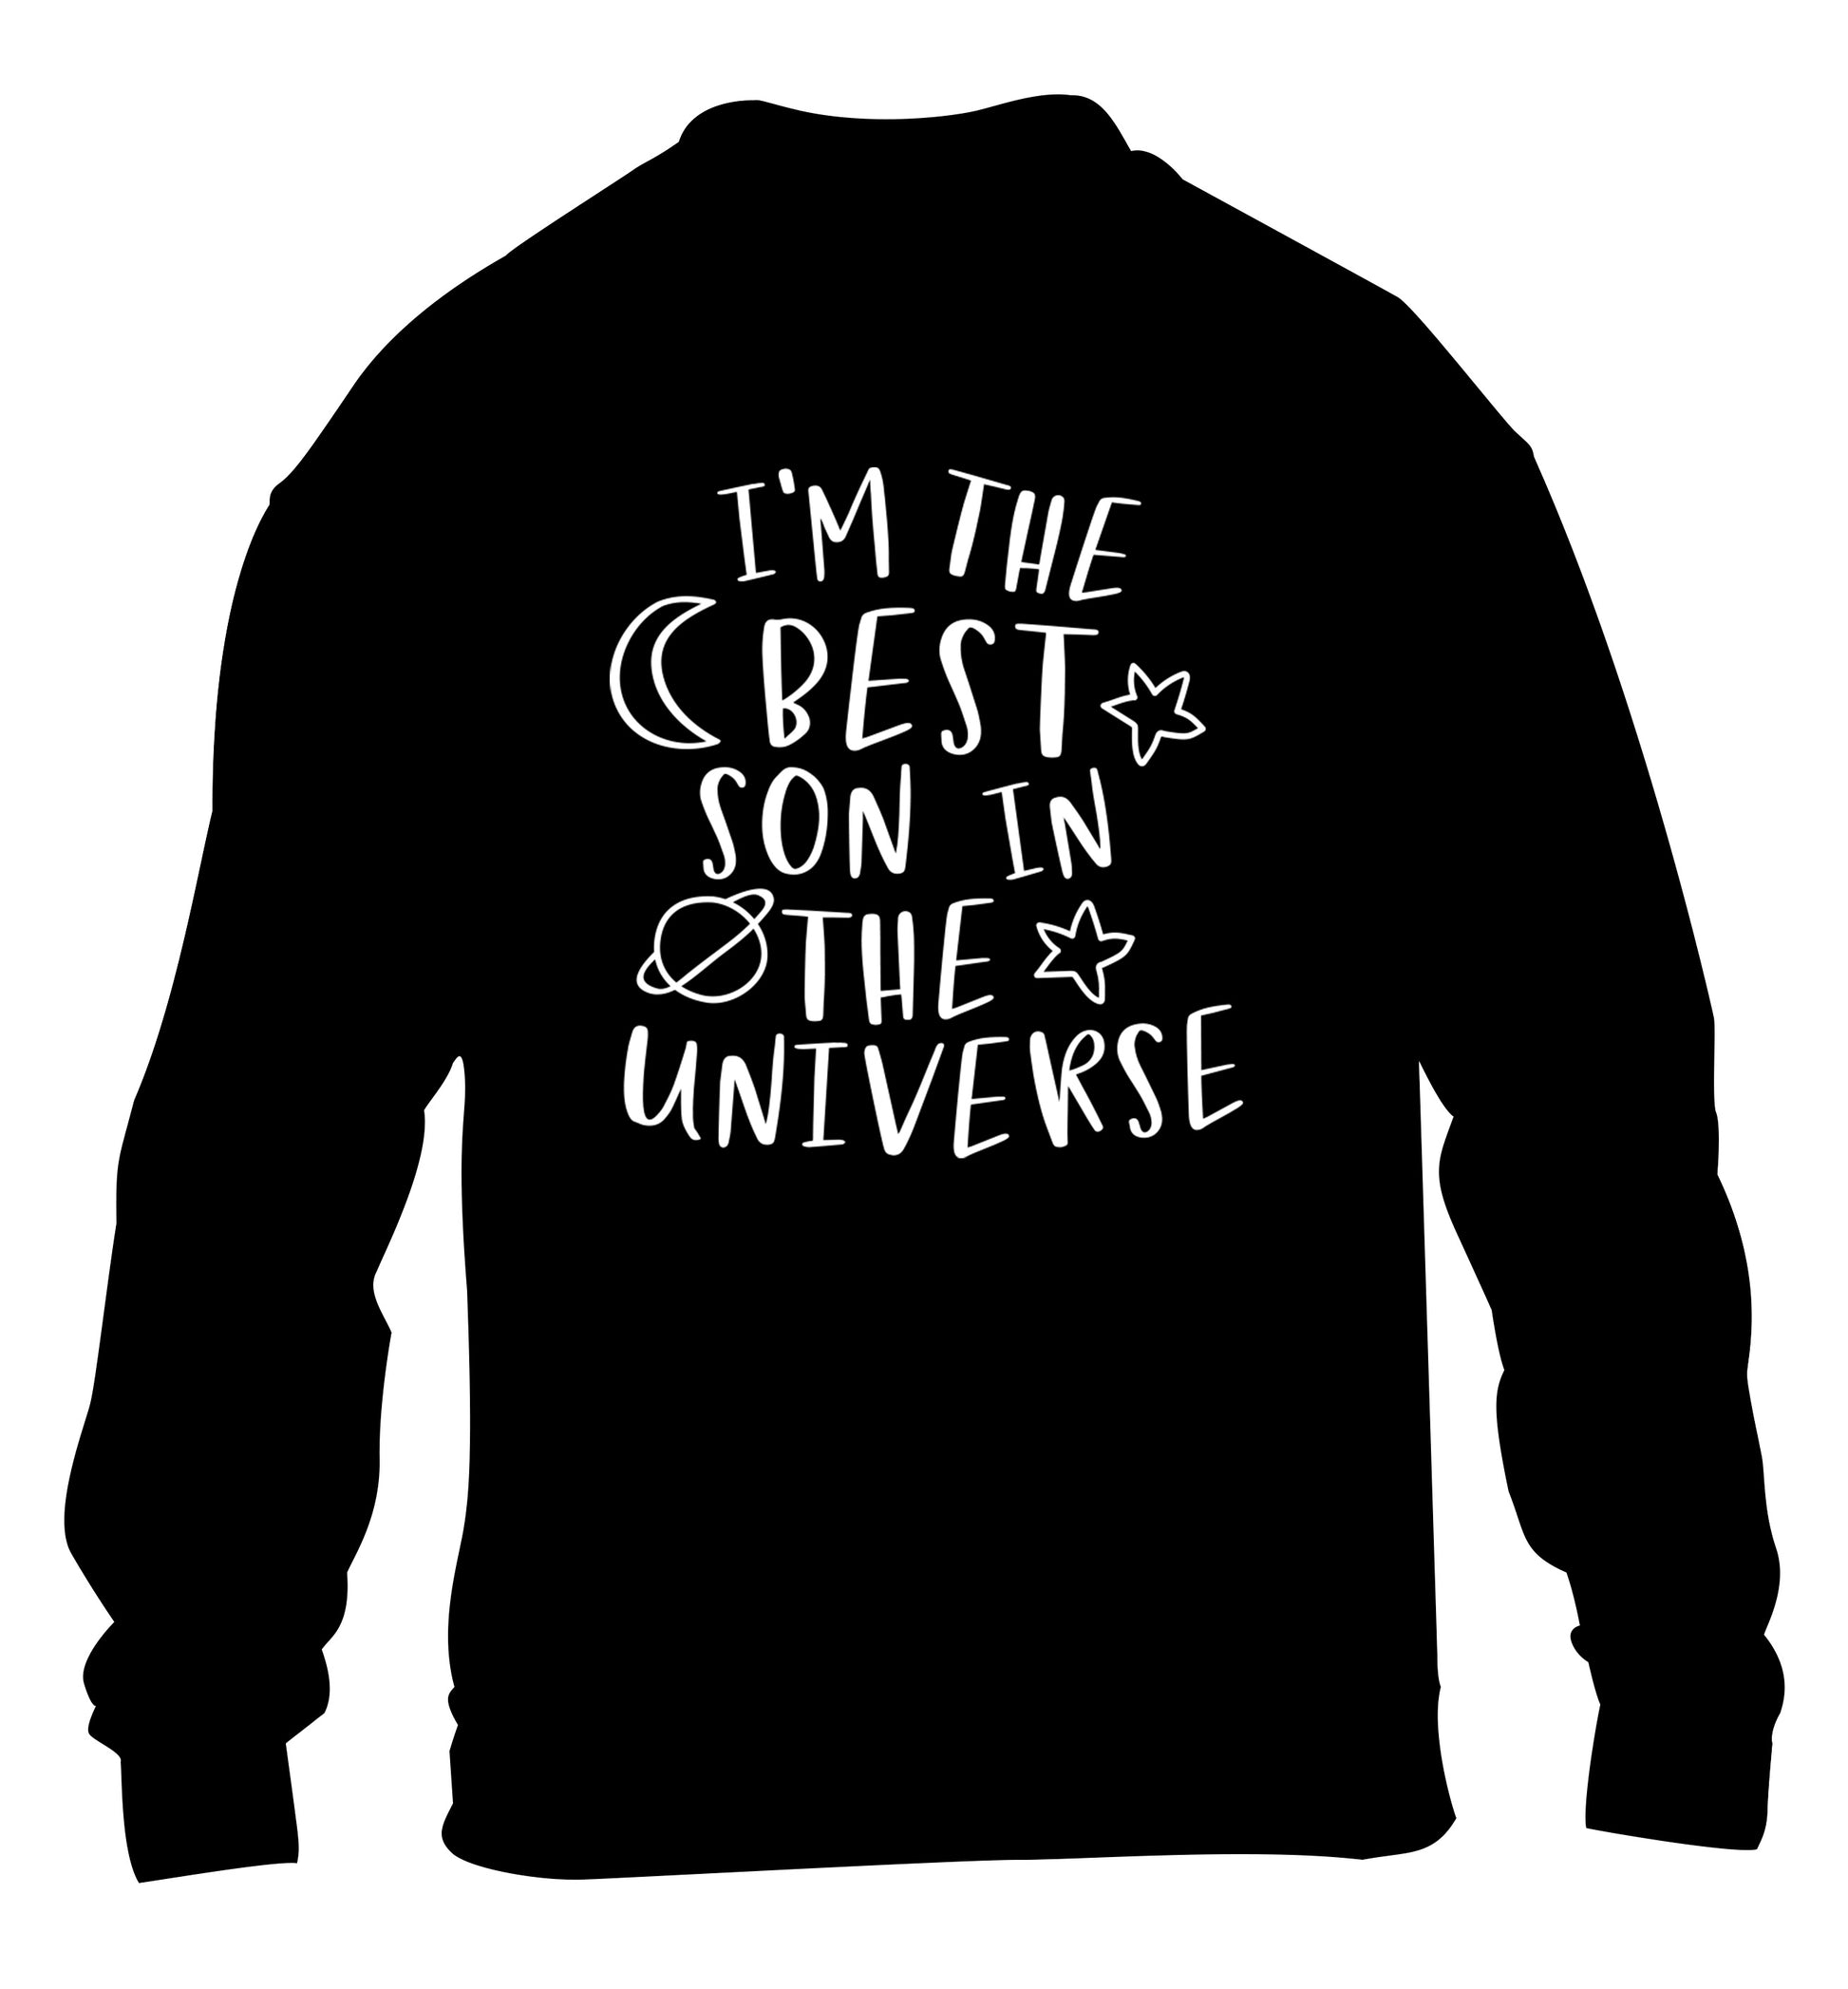 I'm the best son in the universe children's black sweater 12-13 Years